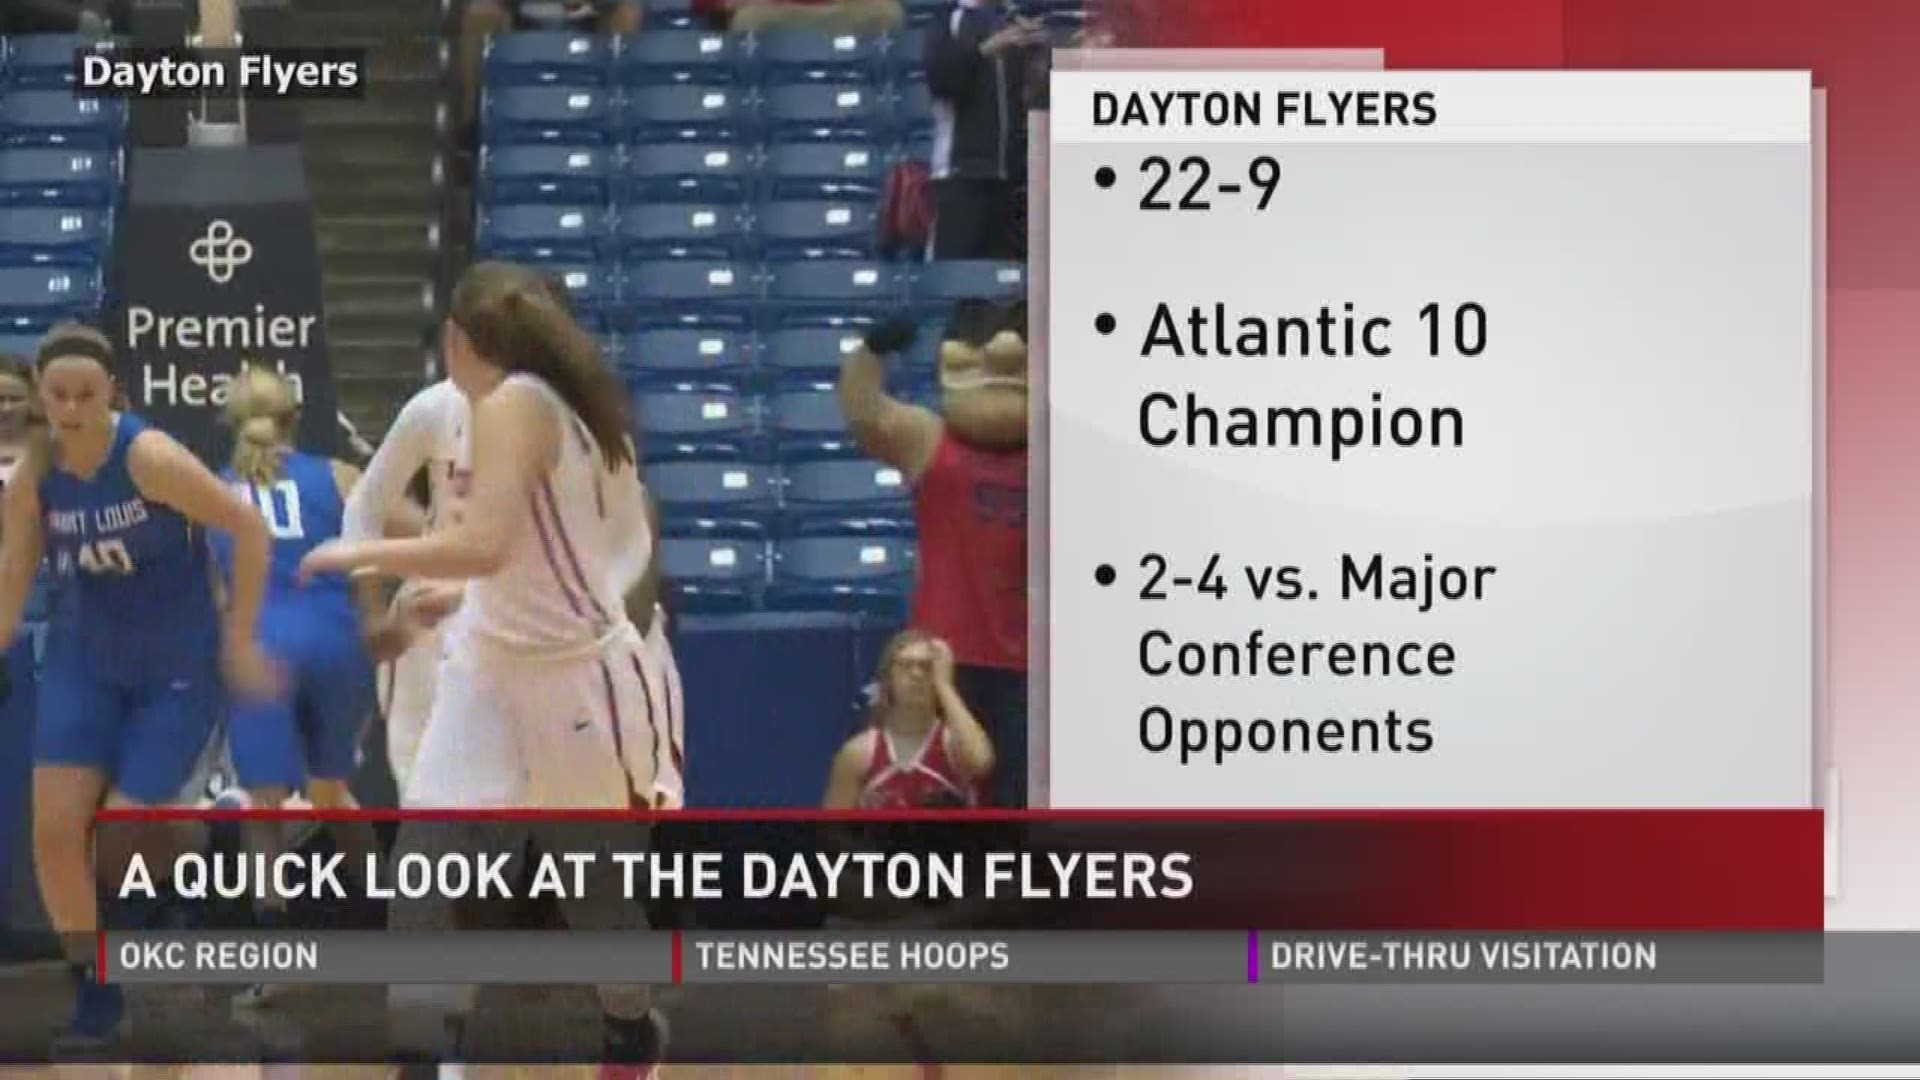 The Lady Vols get the No.5 seed in the Oklahoma City region. Here's a look at the team's first round matchup vs Dayton, and what the rest of the region has in store.